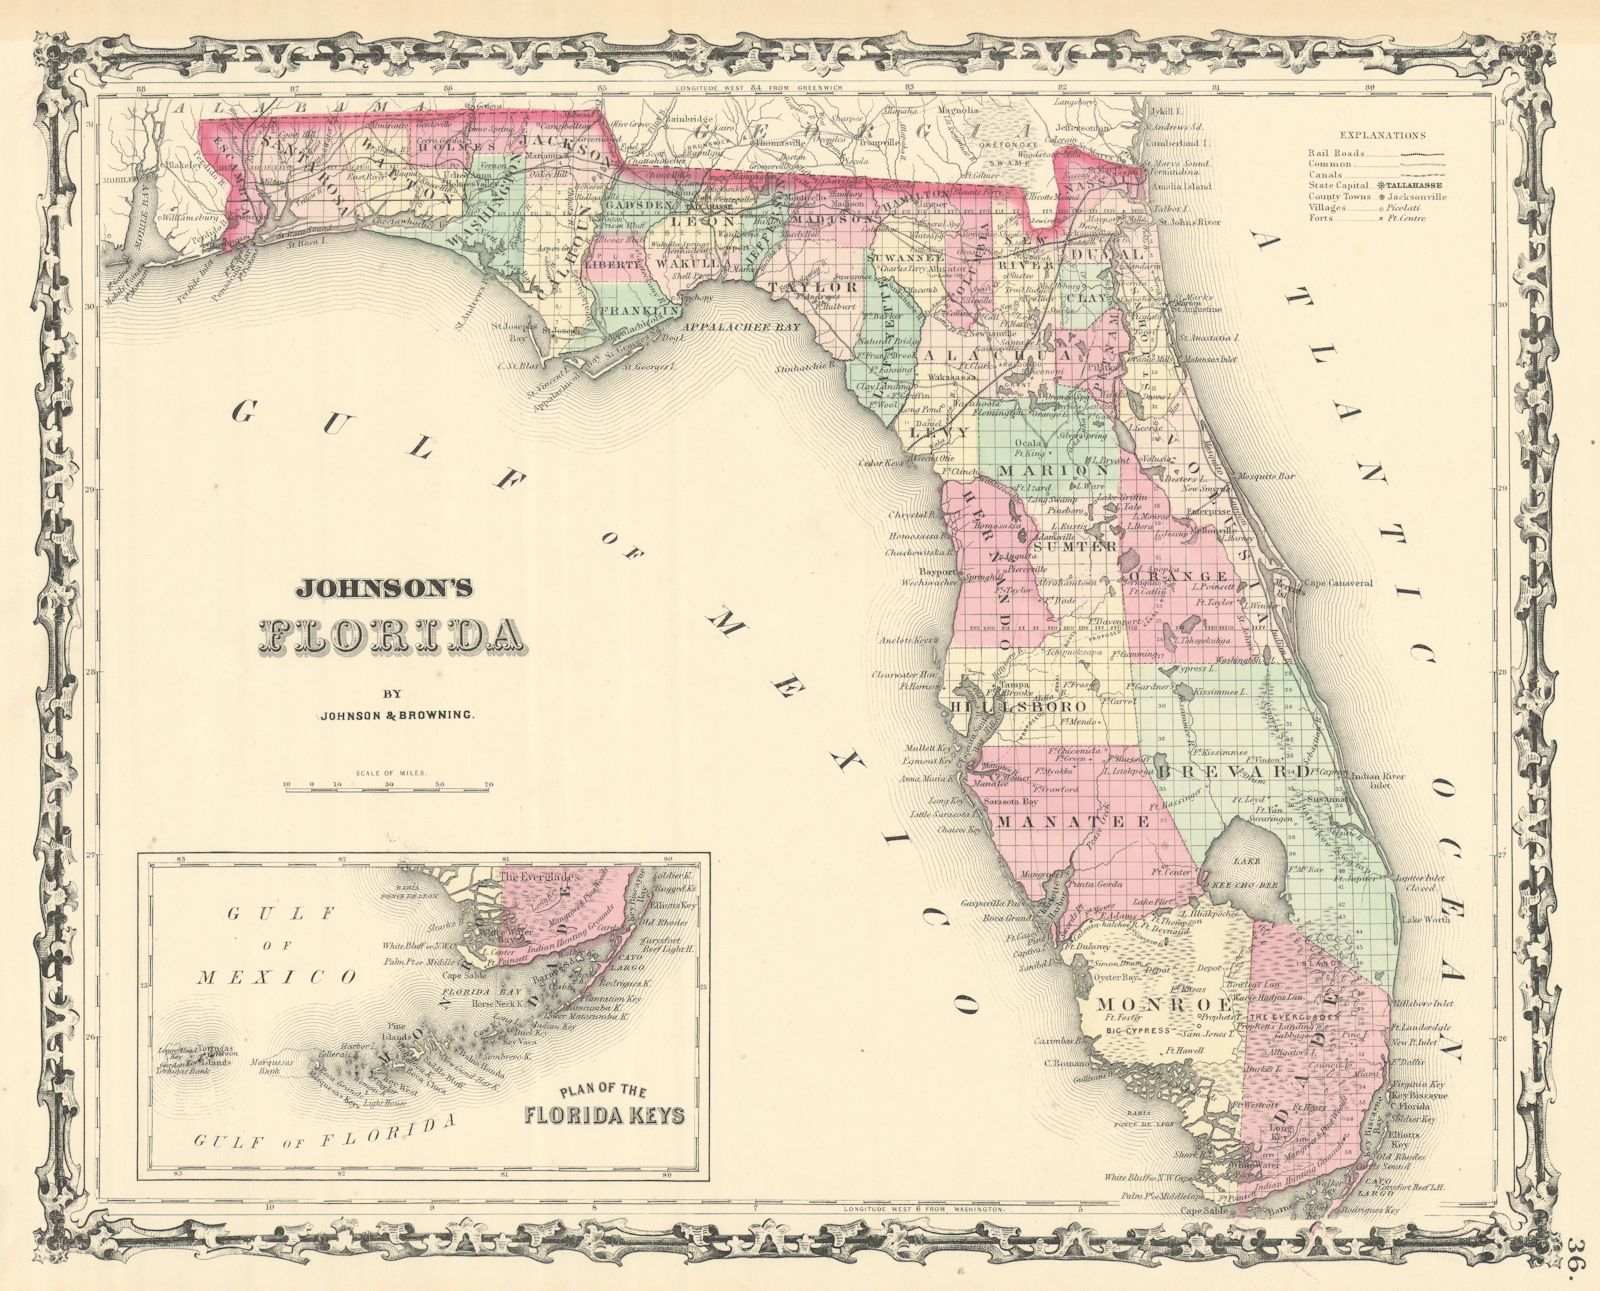 Johnson's Florida. Florida Keys. US state map showing counties 1861 old